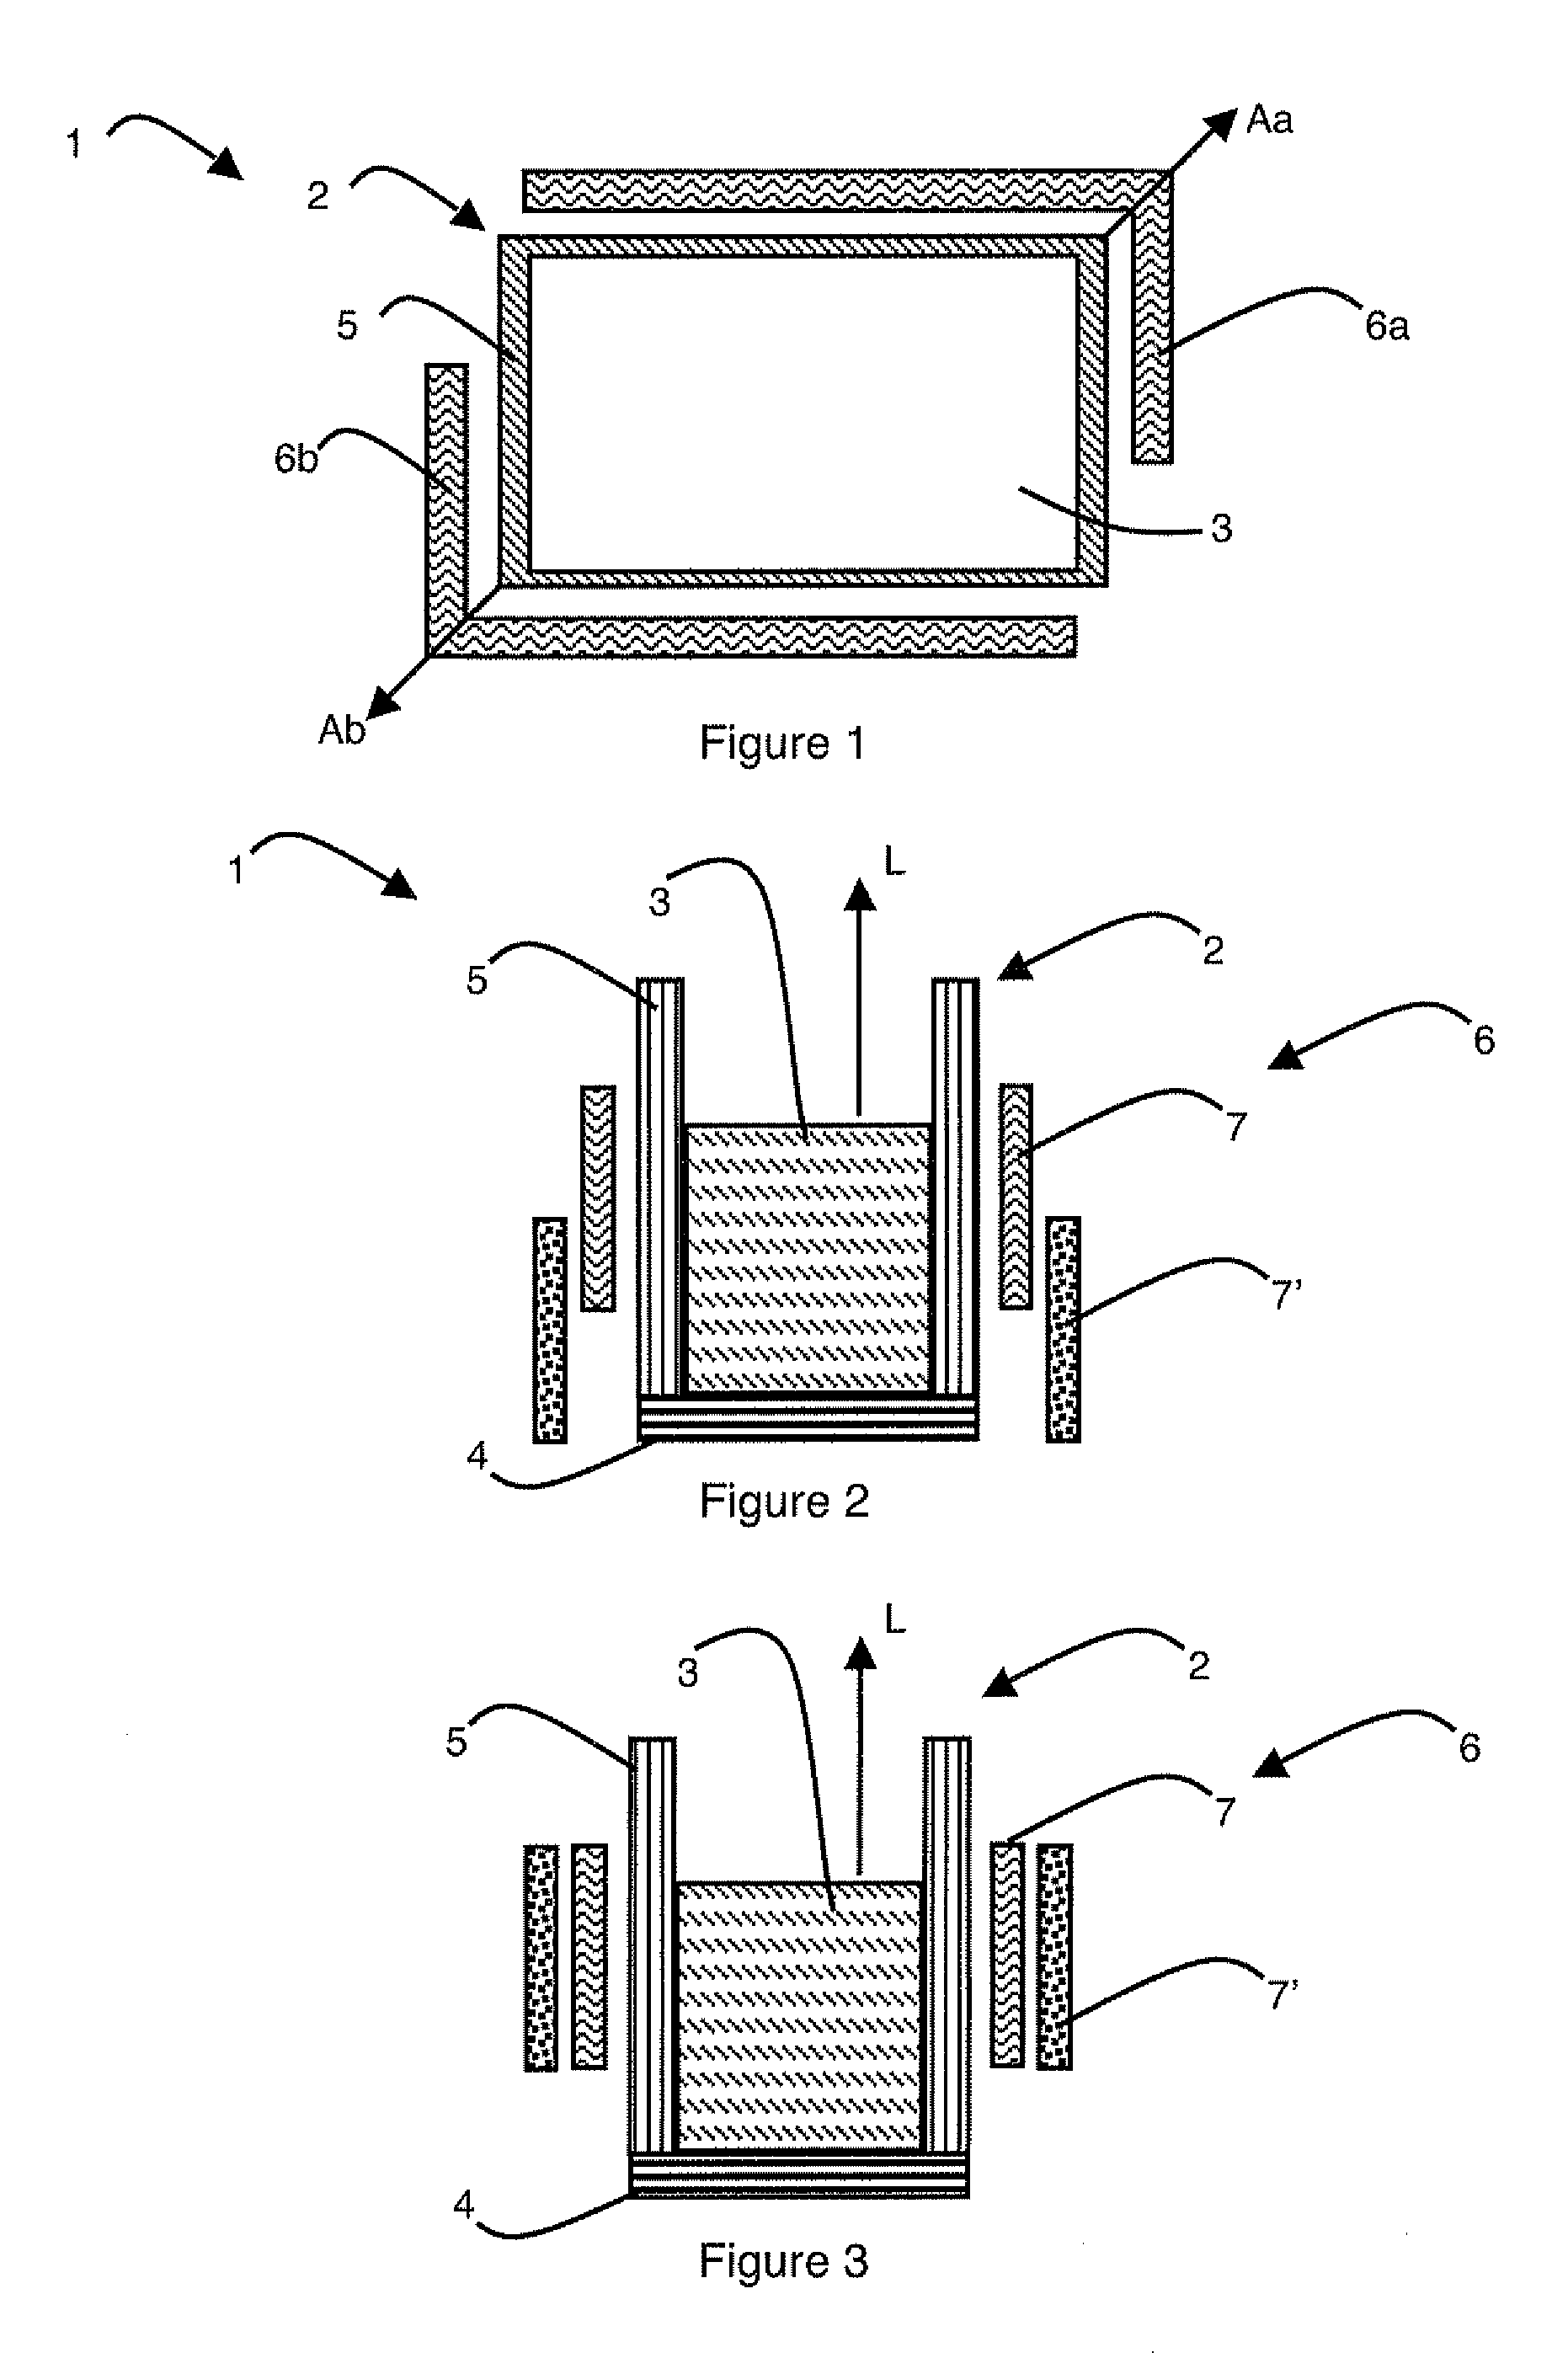 Melting-solidification furnace with variable heat exchange via the side walls